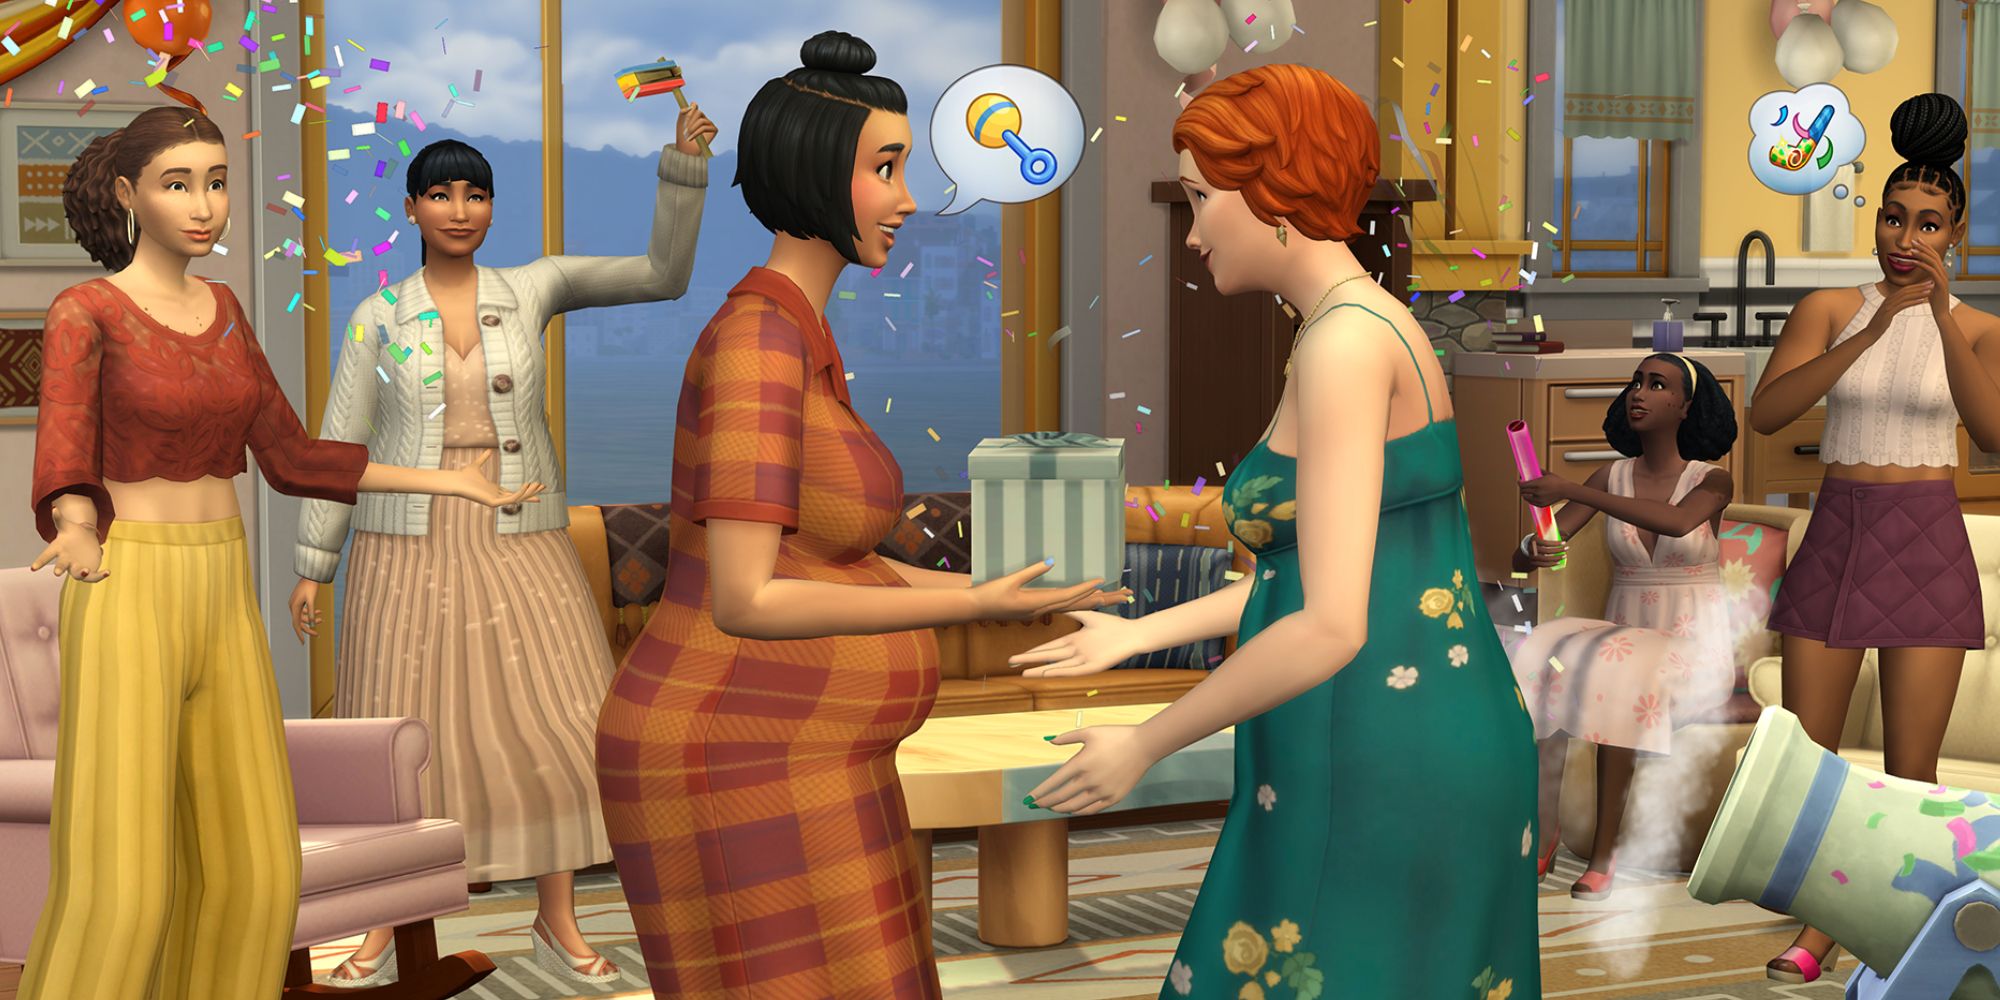 Sims 4 growing up together, having a baby with sims celebrating